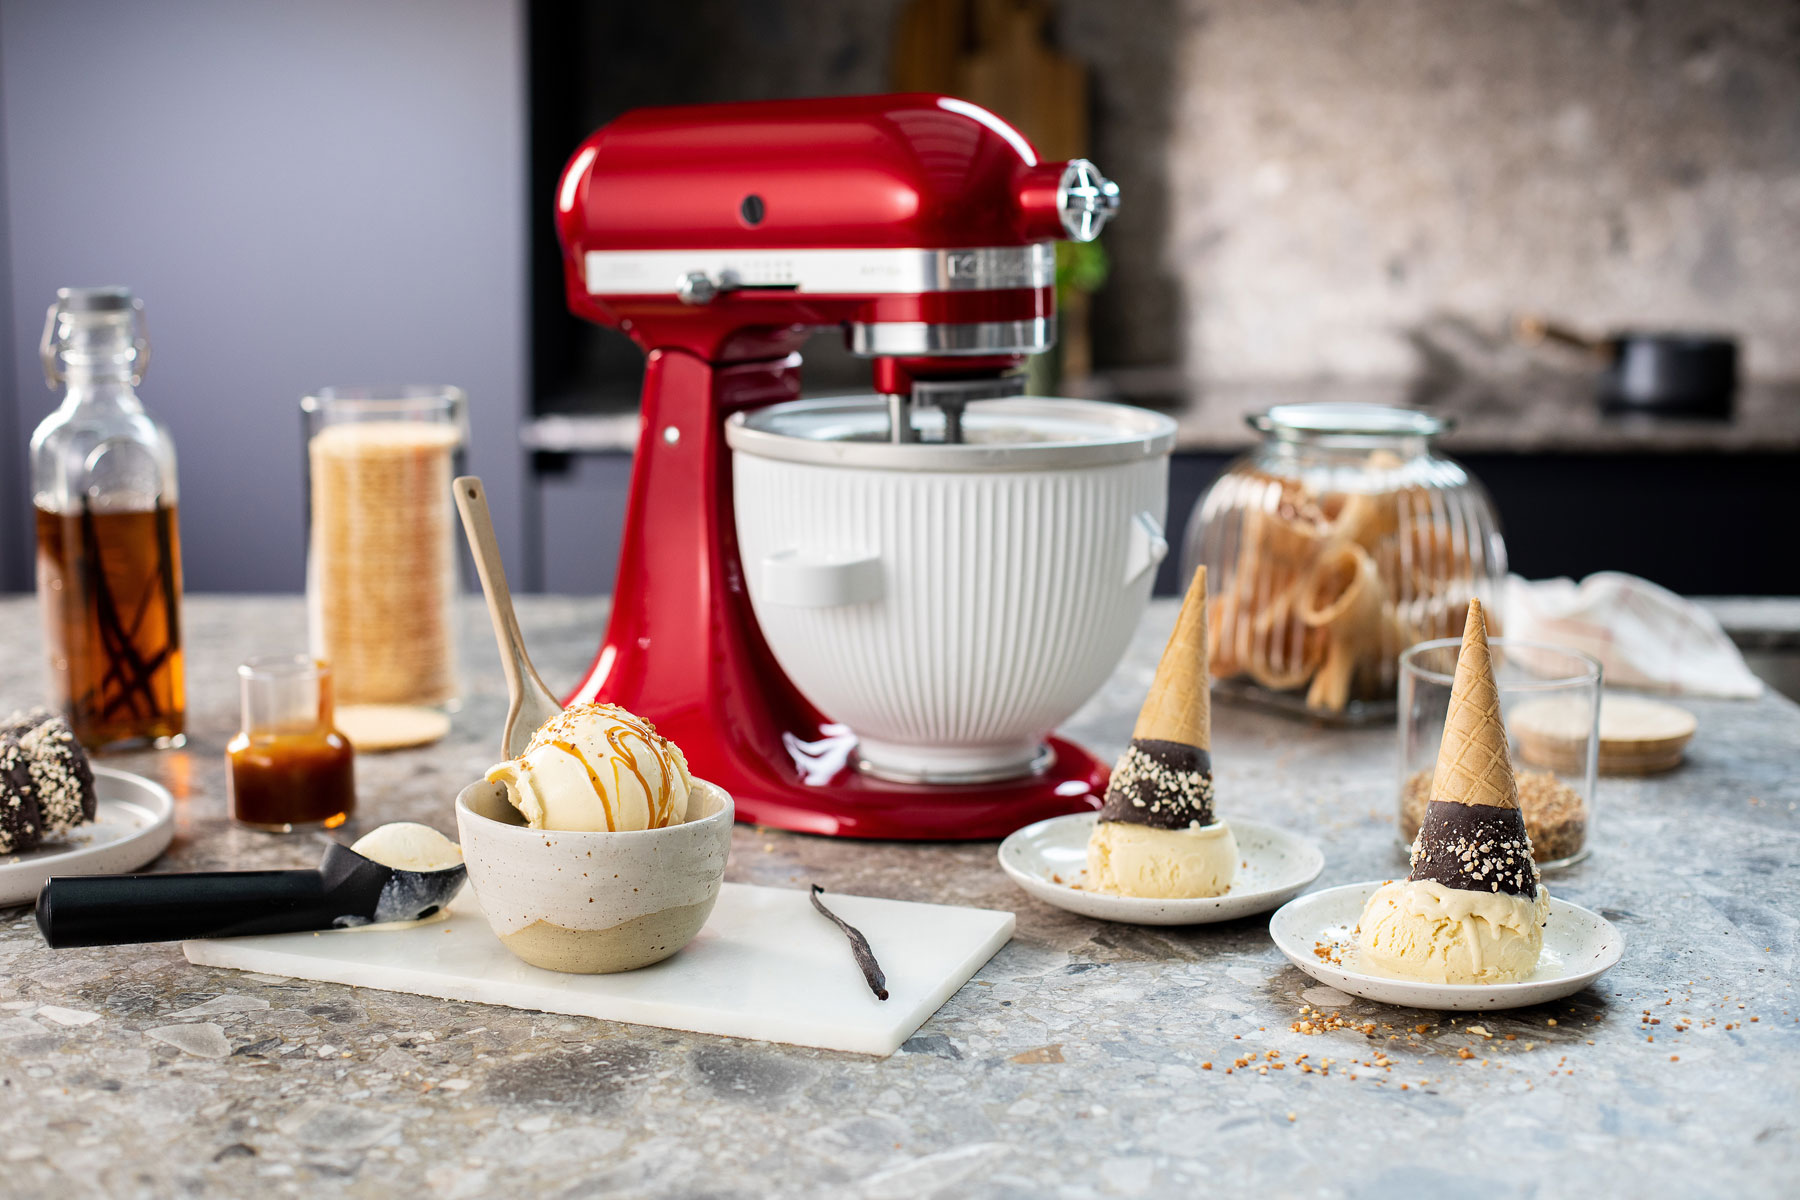 https://www.luxuriousmagazine.com/wp-content/uploads/2022/06/KitchenAid-Ice-Cream-Maker-Attachment-with-a-Candy-Apple-mixer.jpg